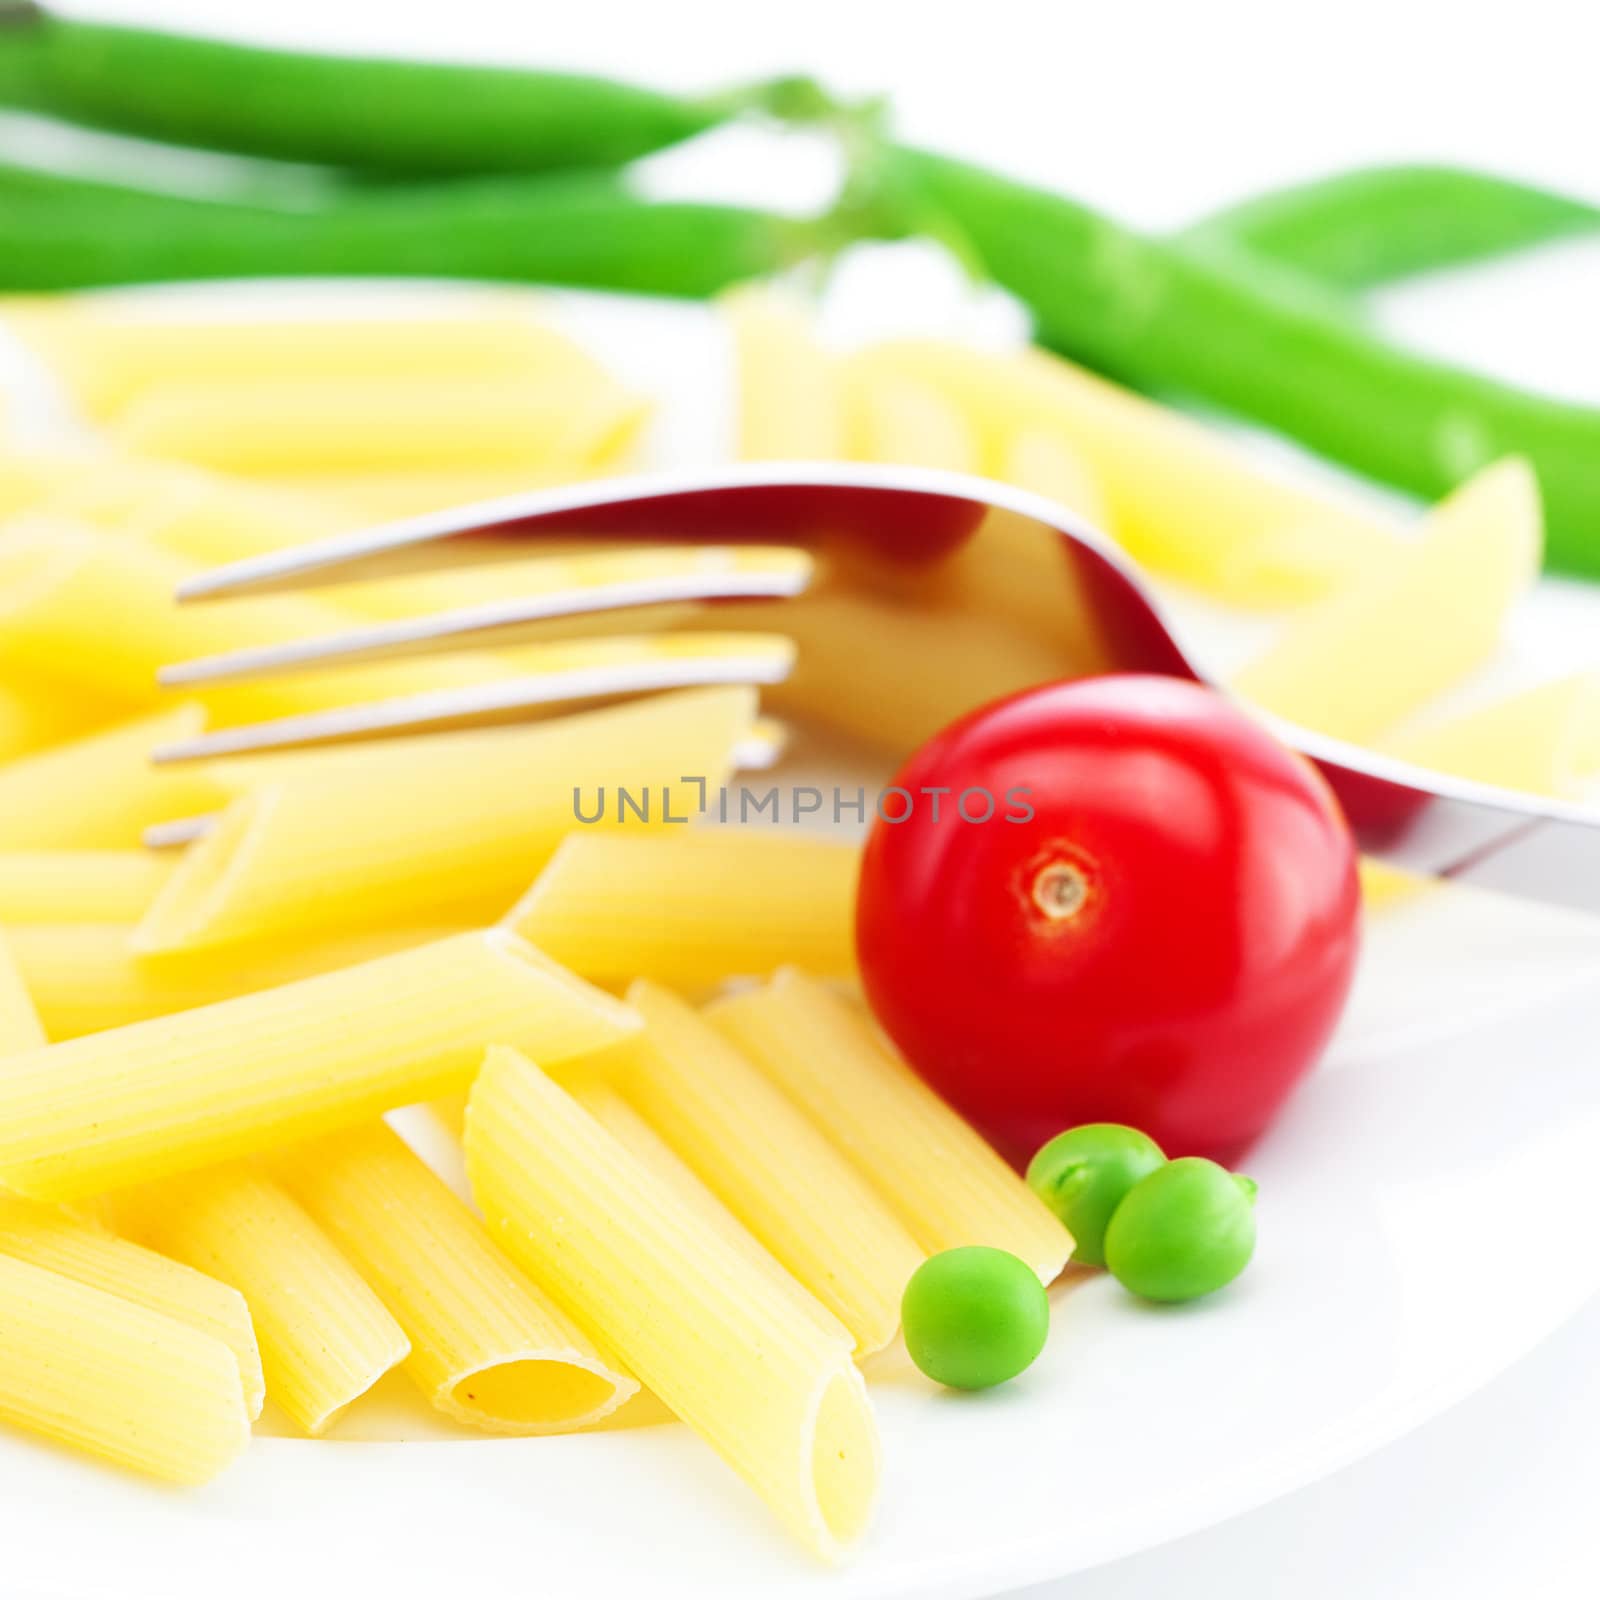 tomatoes, peas, pasta and fork on a plate isolated on white by jannyjus